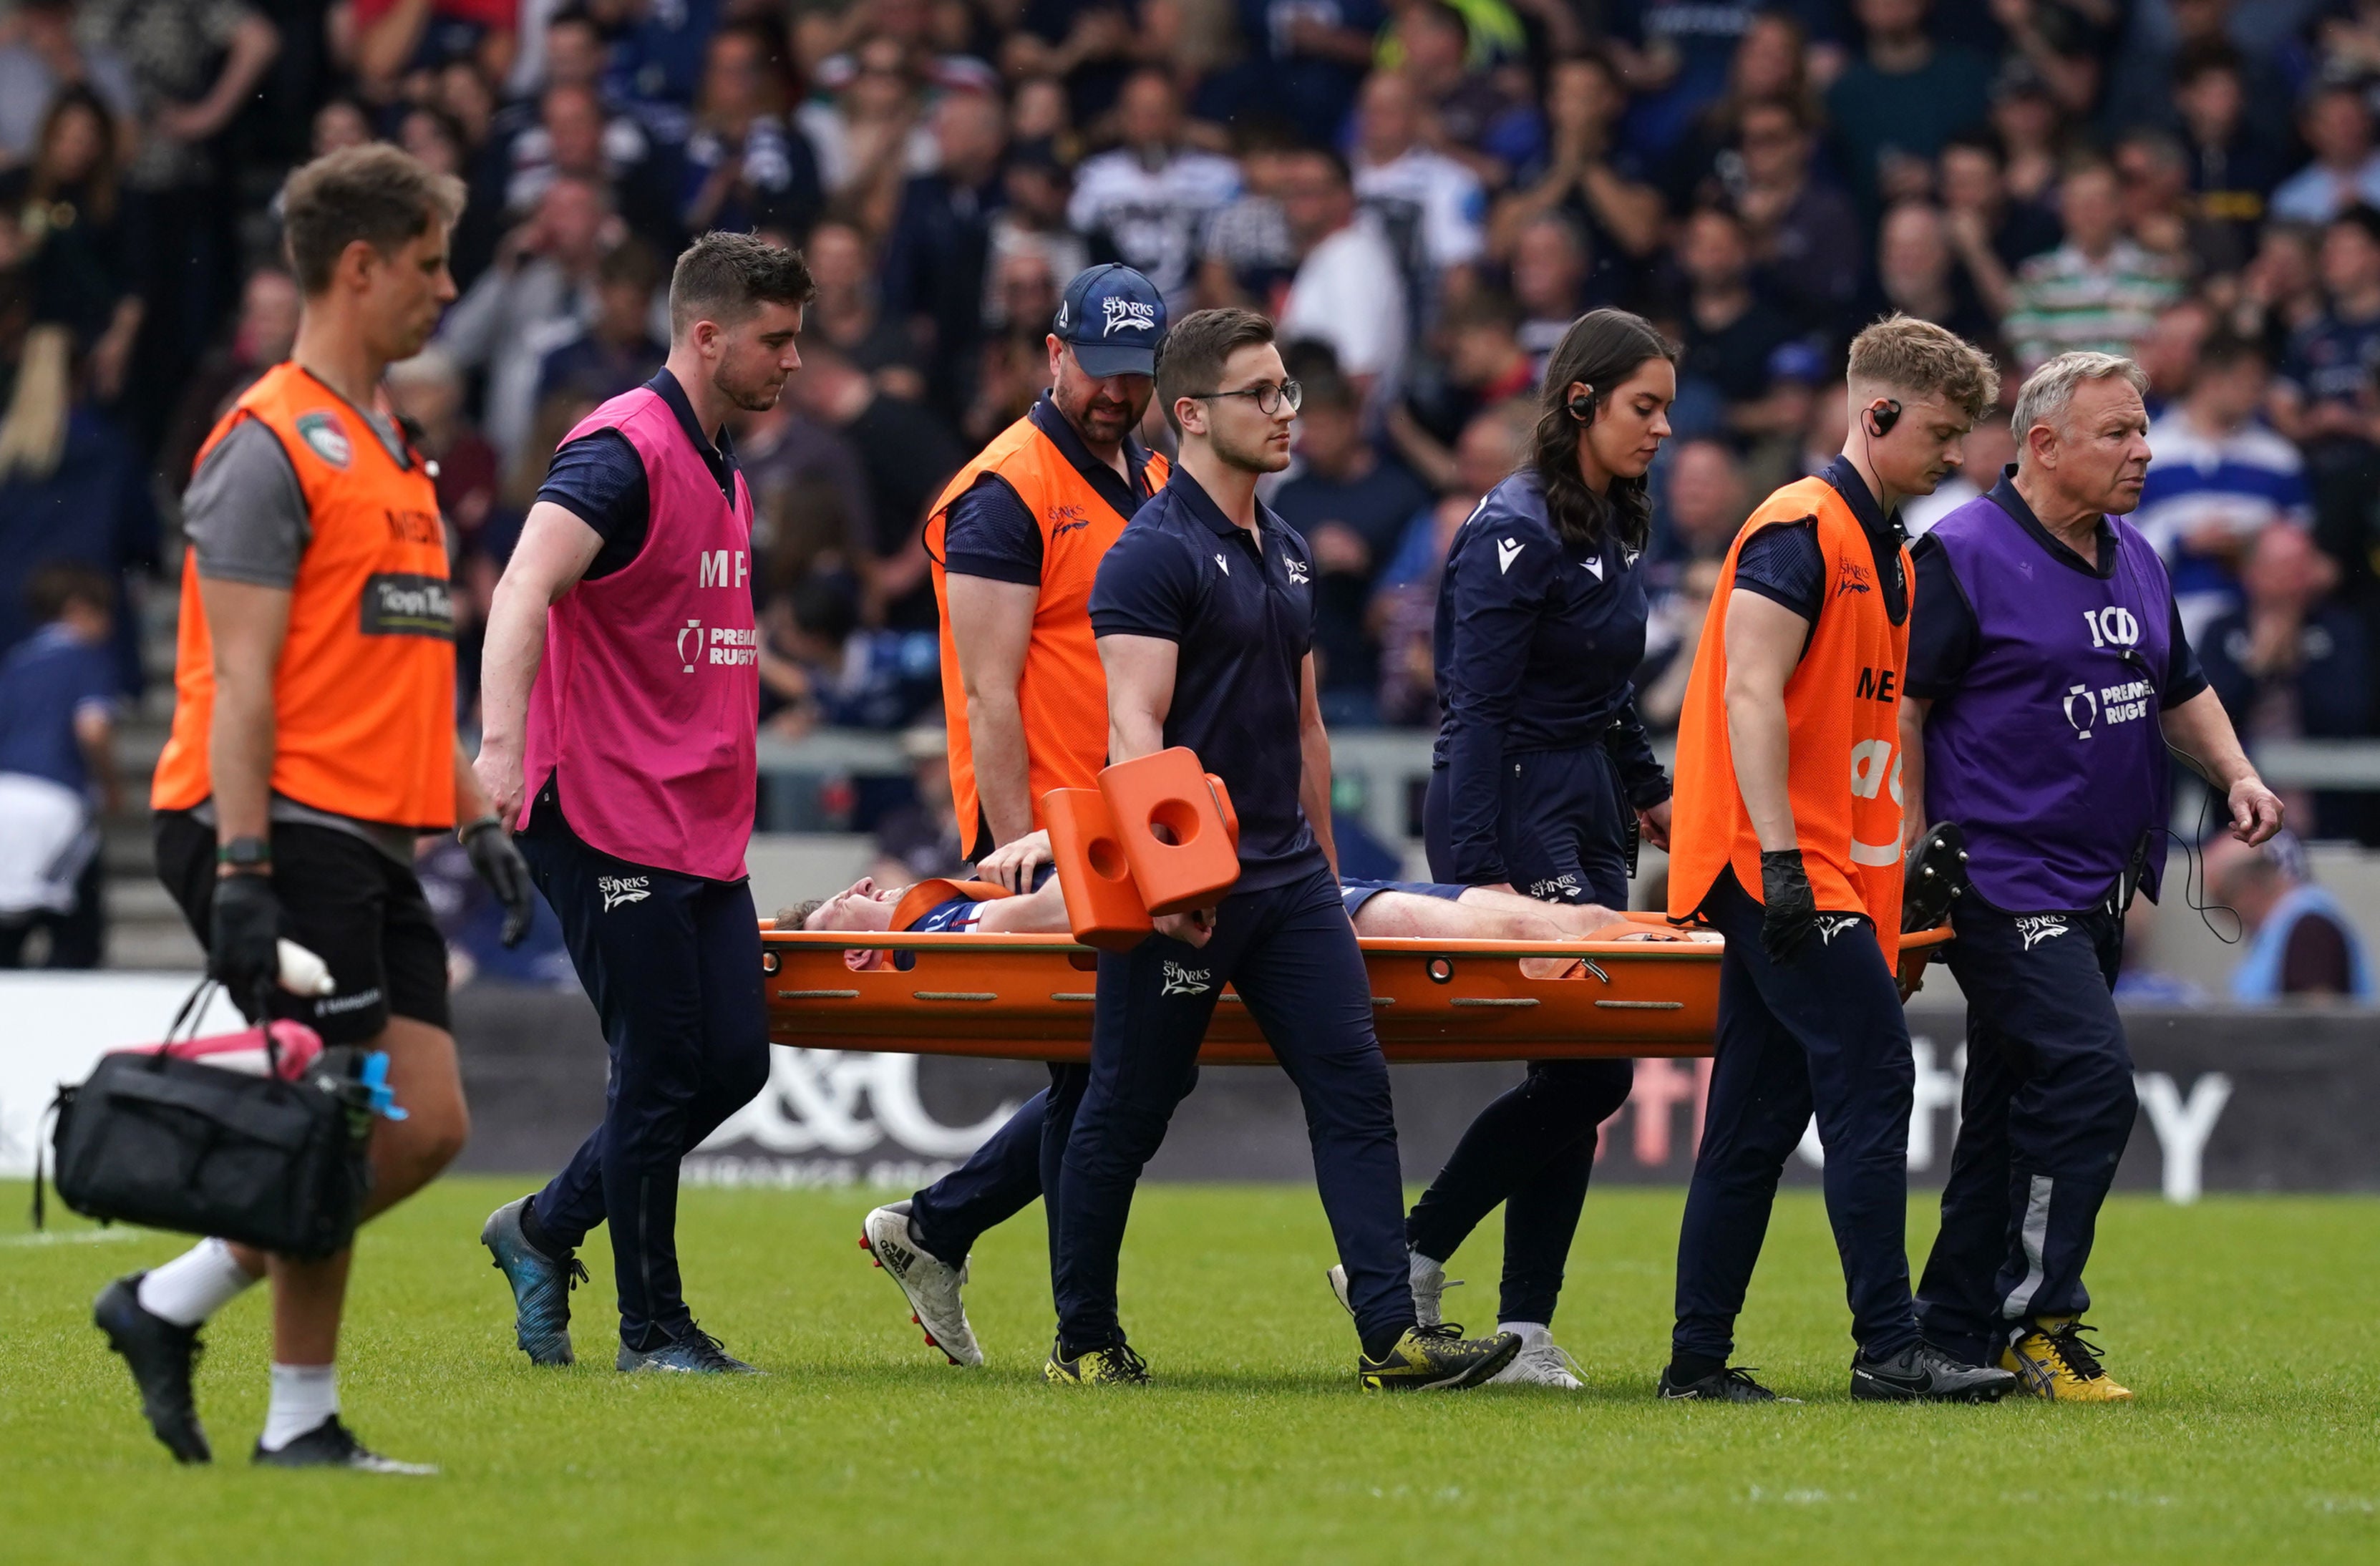 Ben Curry was stretchered off injured for Sale